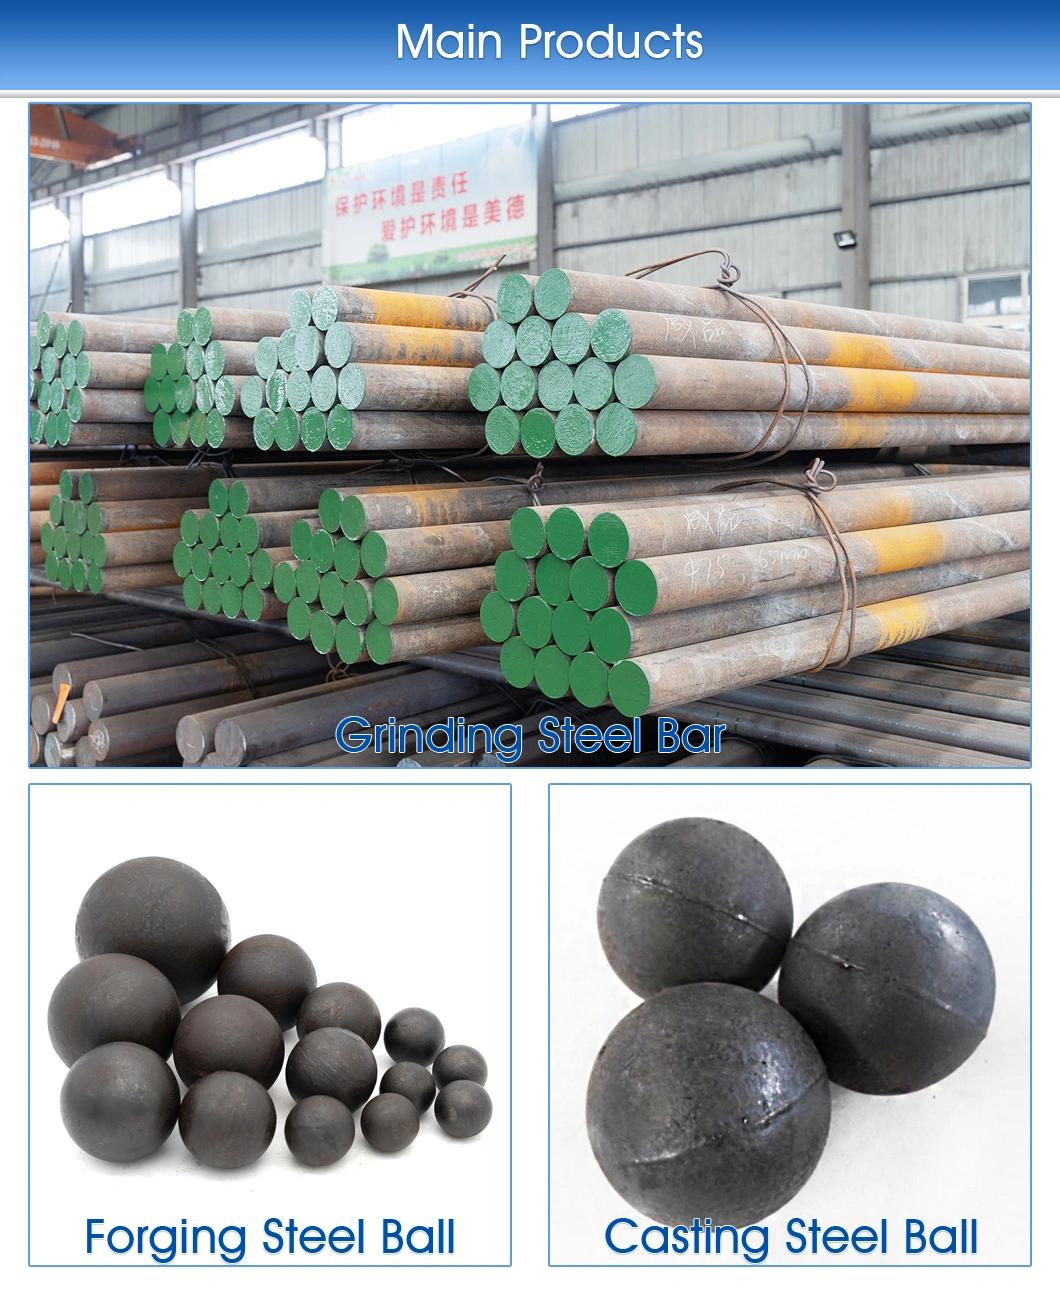 High-Quality Steel Grinding Ball with High Density & High Hardness